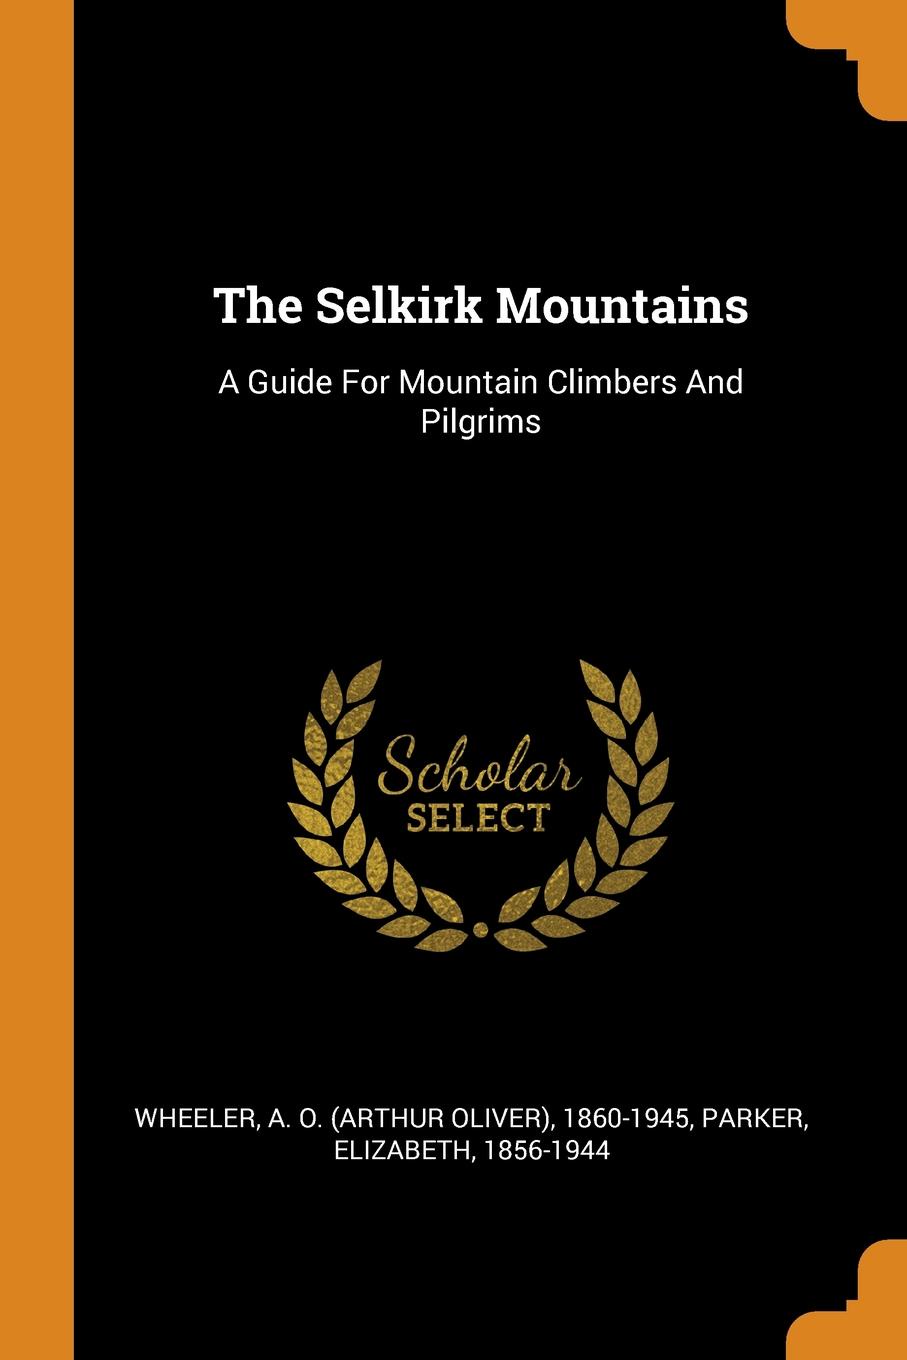 The Selkirk Mountains. A Guide For Mountain Climbers And Pilgrims